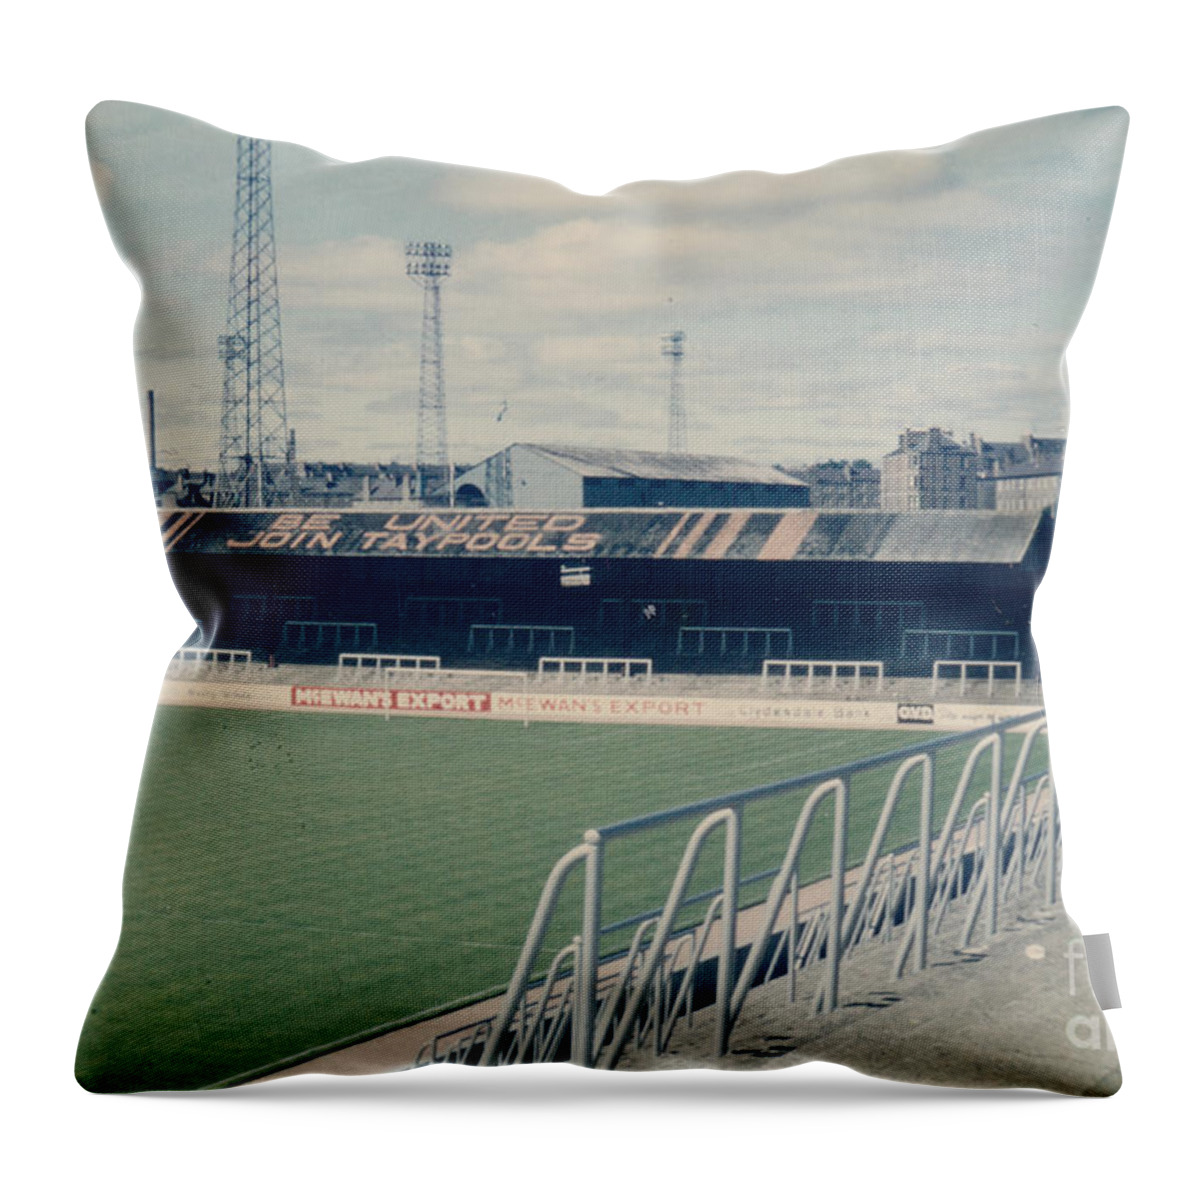  Throw Pillow featuring the photograph Dundee United - Tannadice Park - West Stand The Shed 1 - 1980s by Legendary Football Grounds